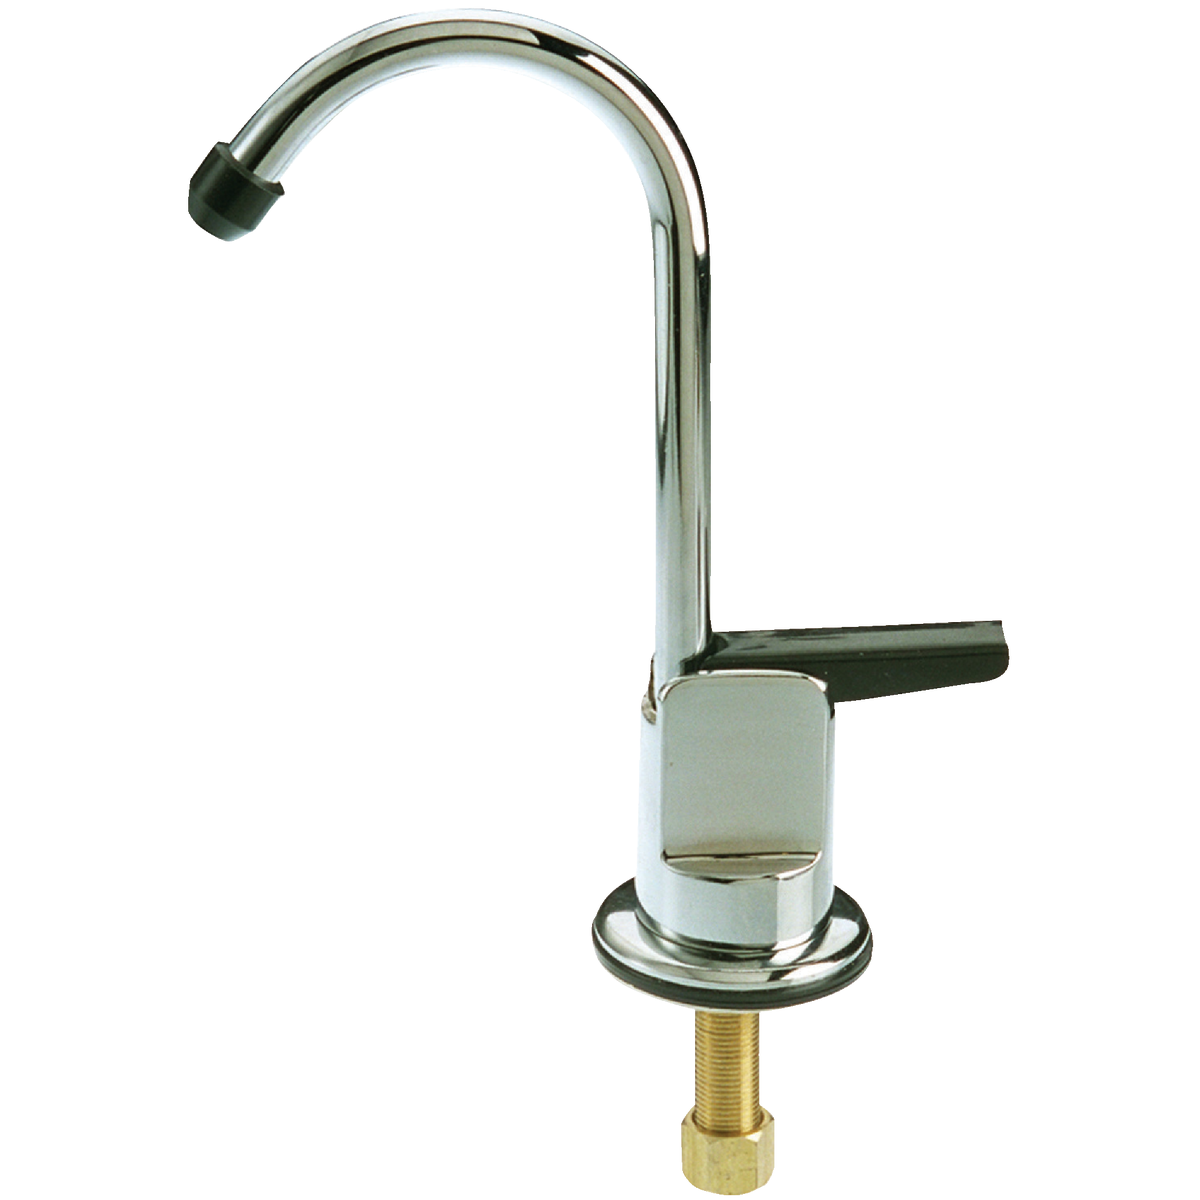 Other Faucets